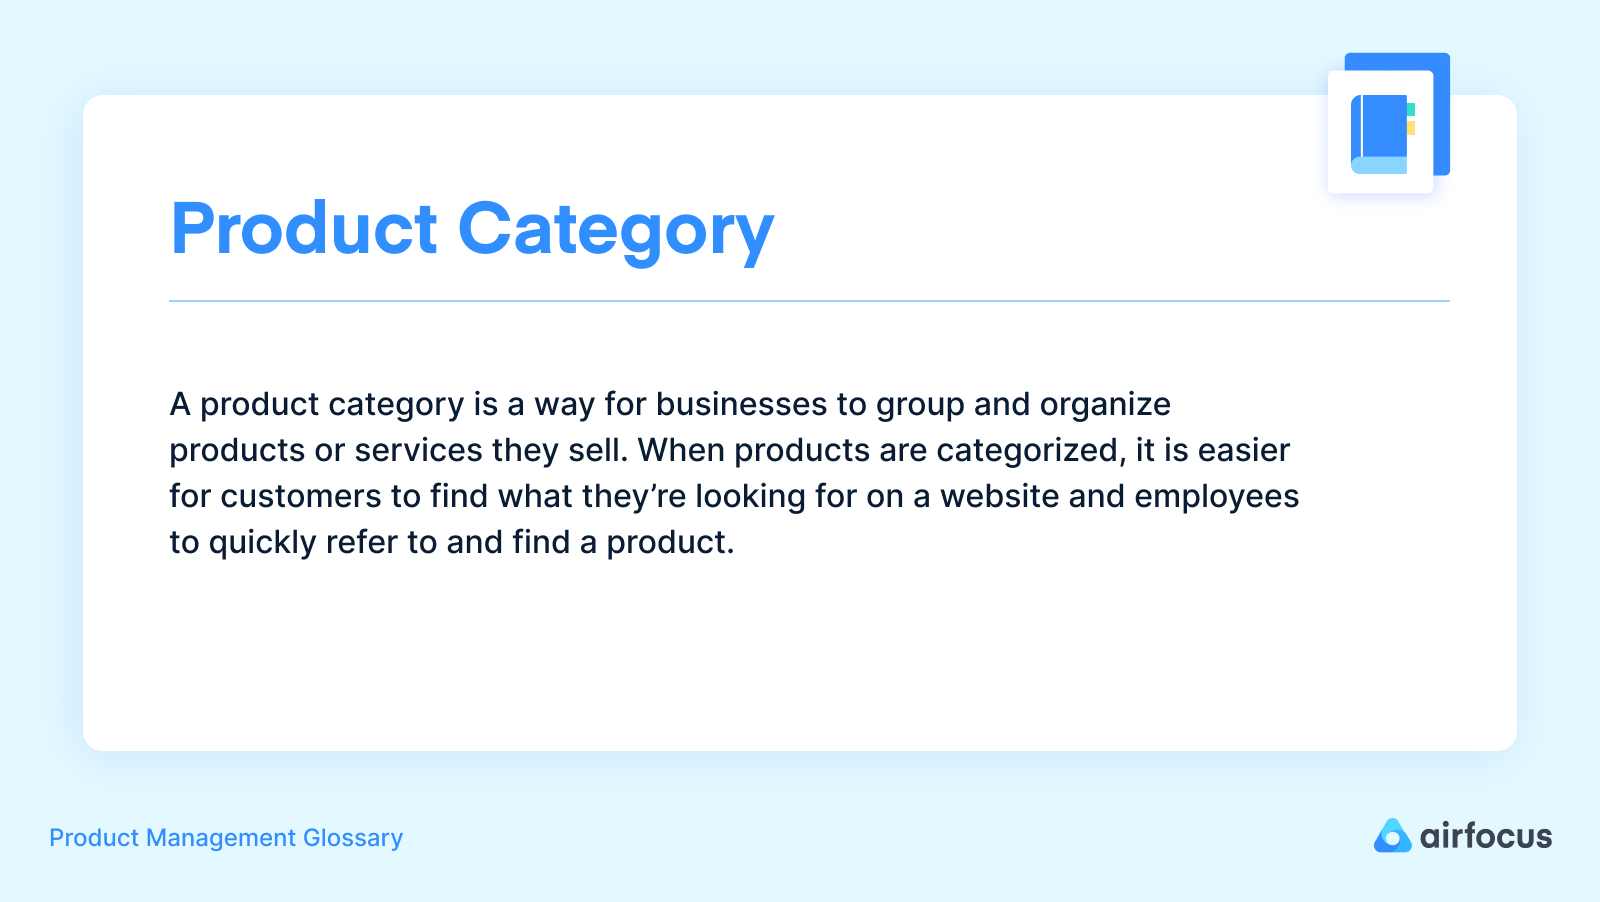 New Products - Category